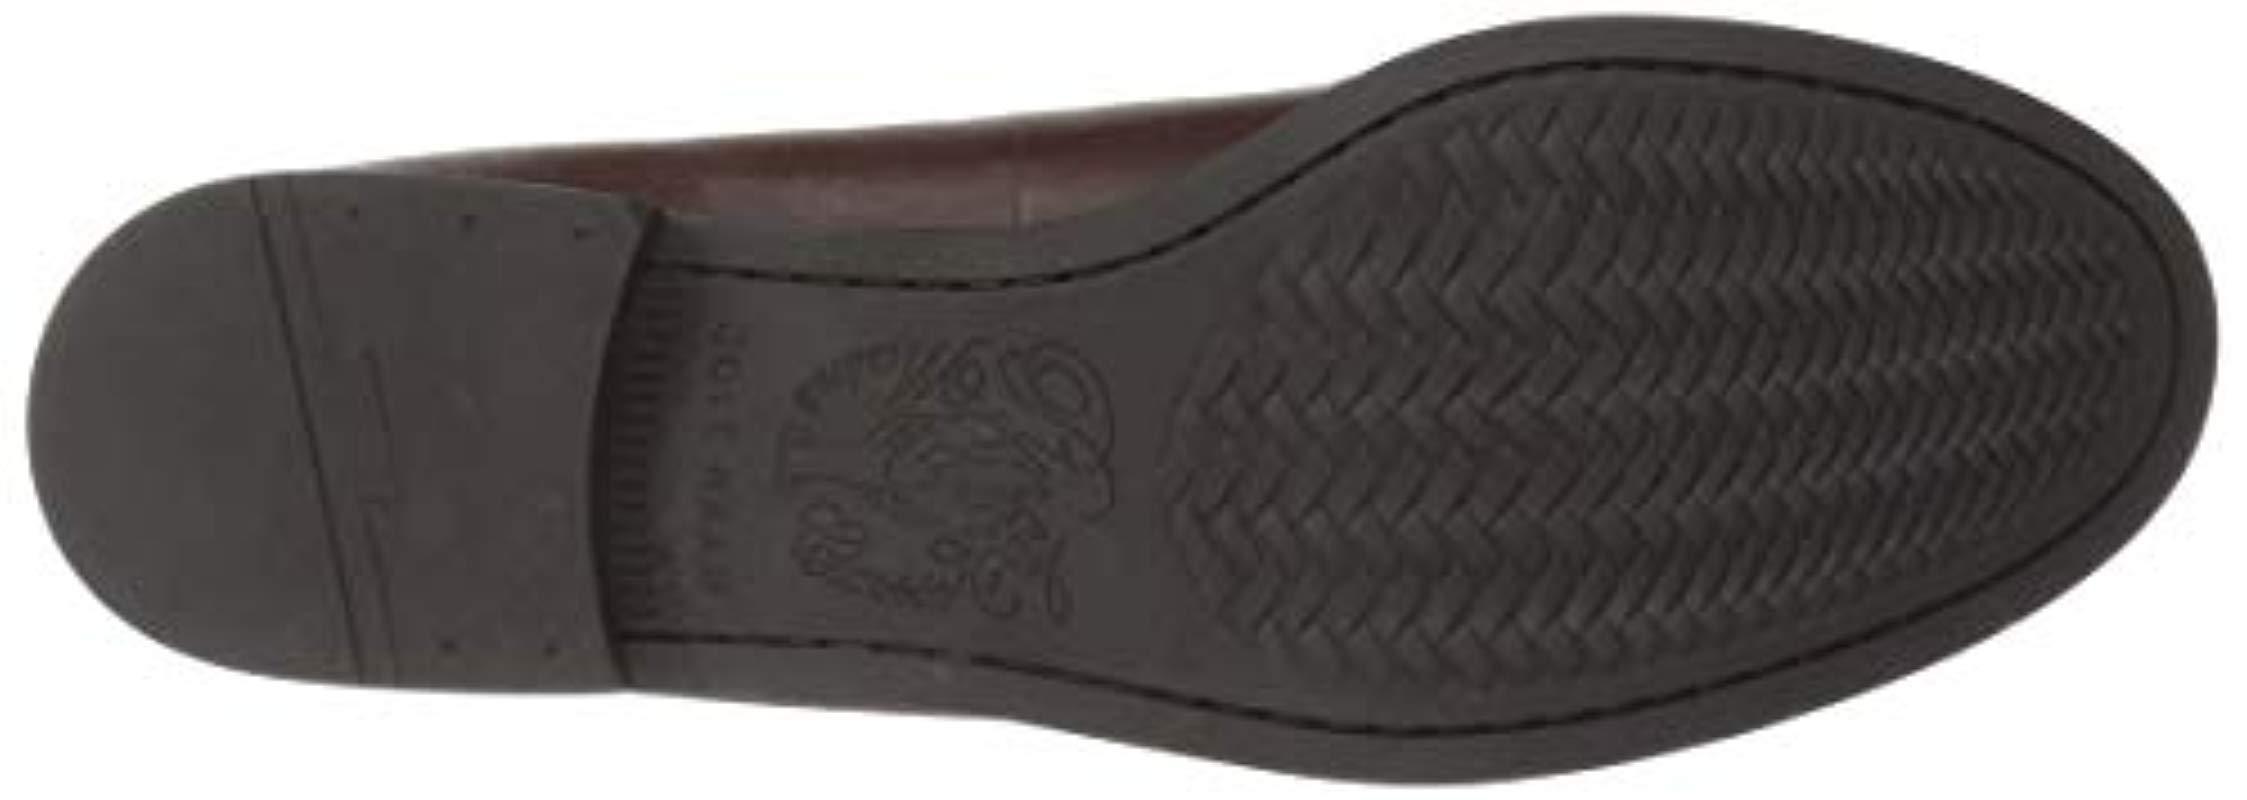 Cole Haan Leather Pinch Lobster Loafer Flat in Brown - Lyst